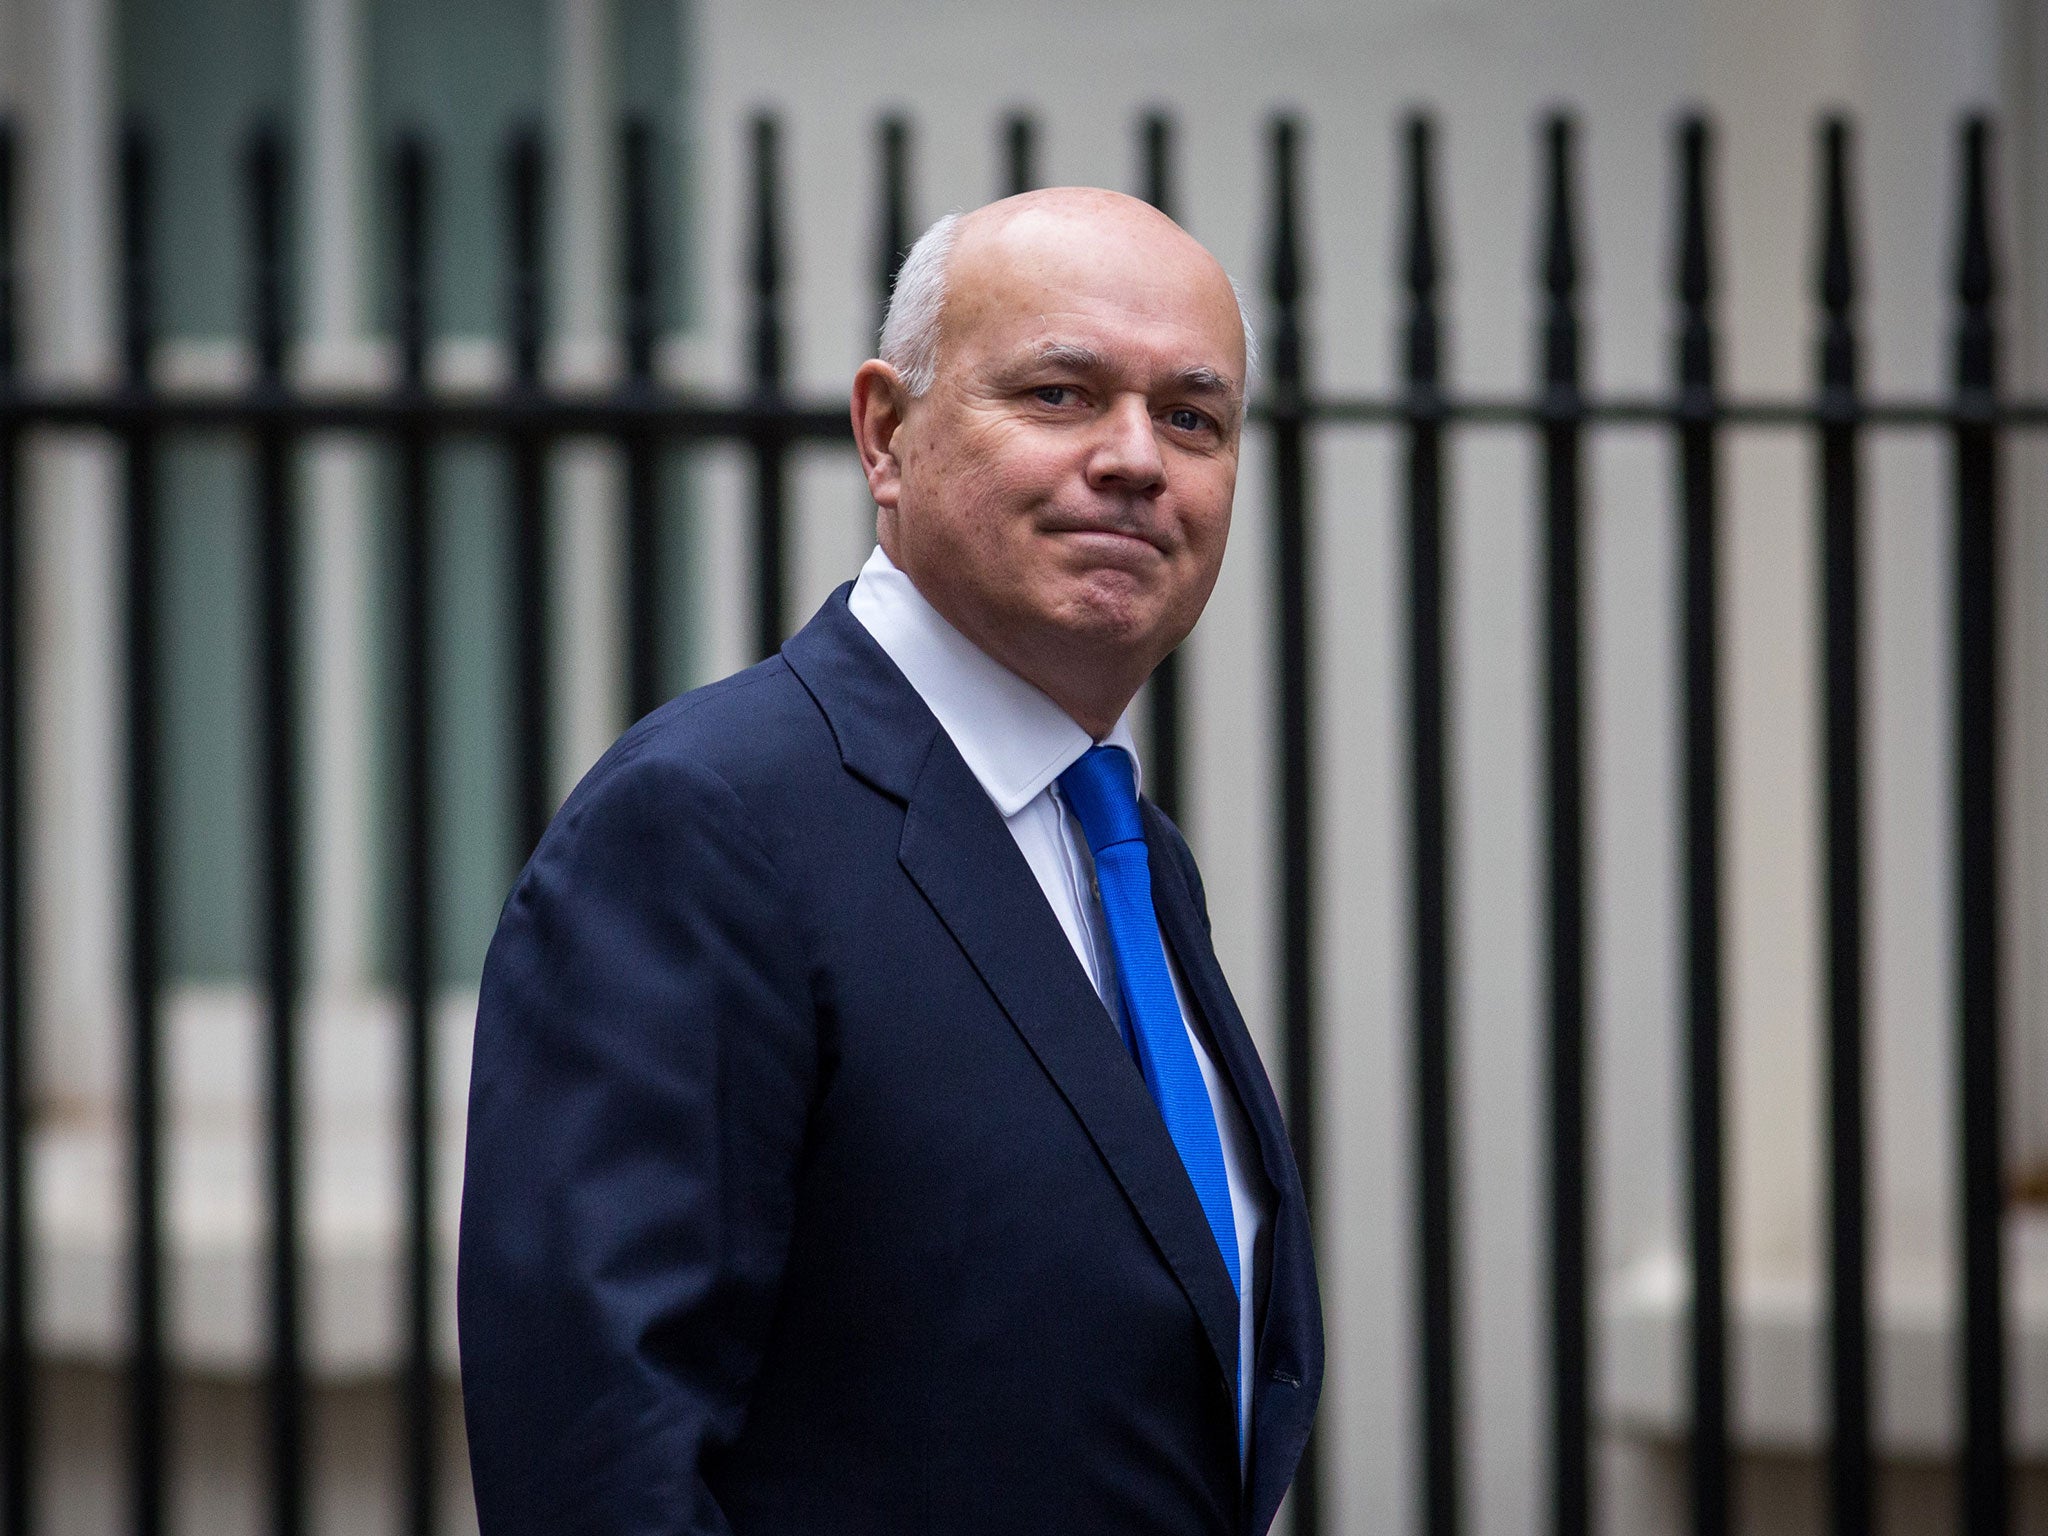 Iain Duncan Smith, the Work and Pensions Secretary